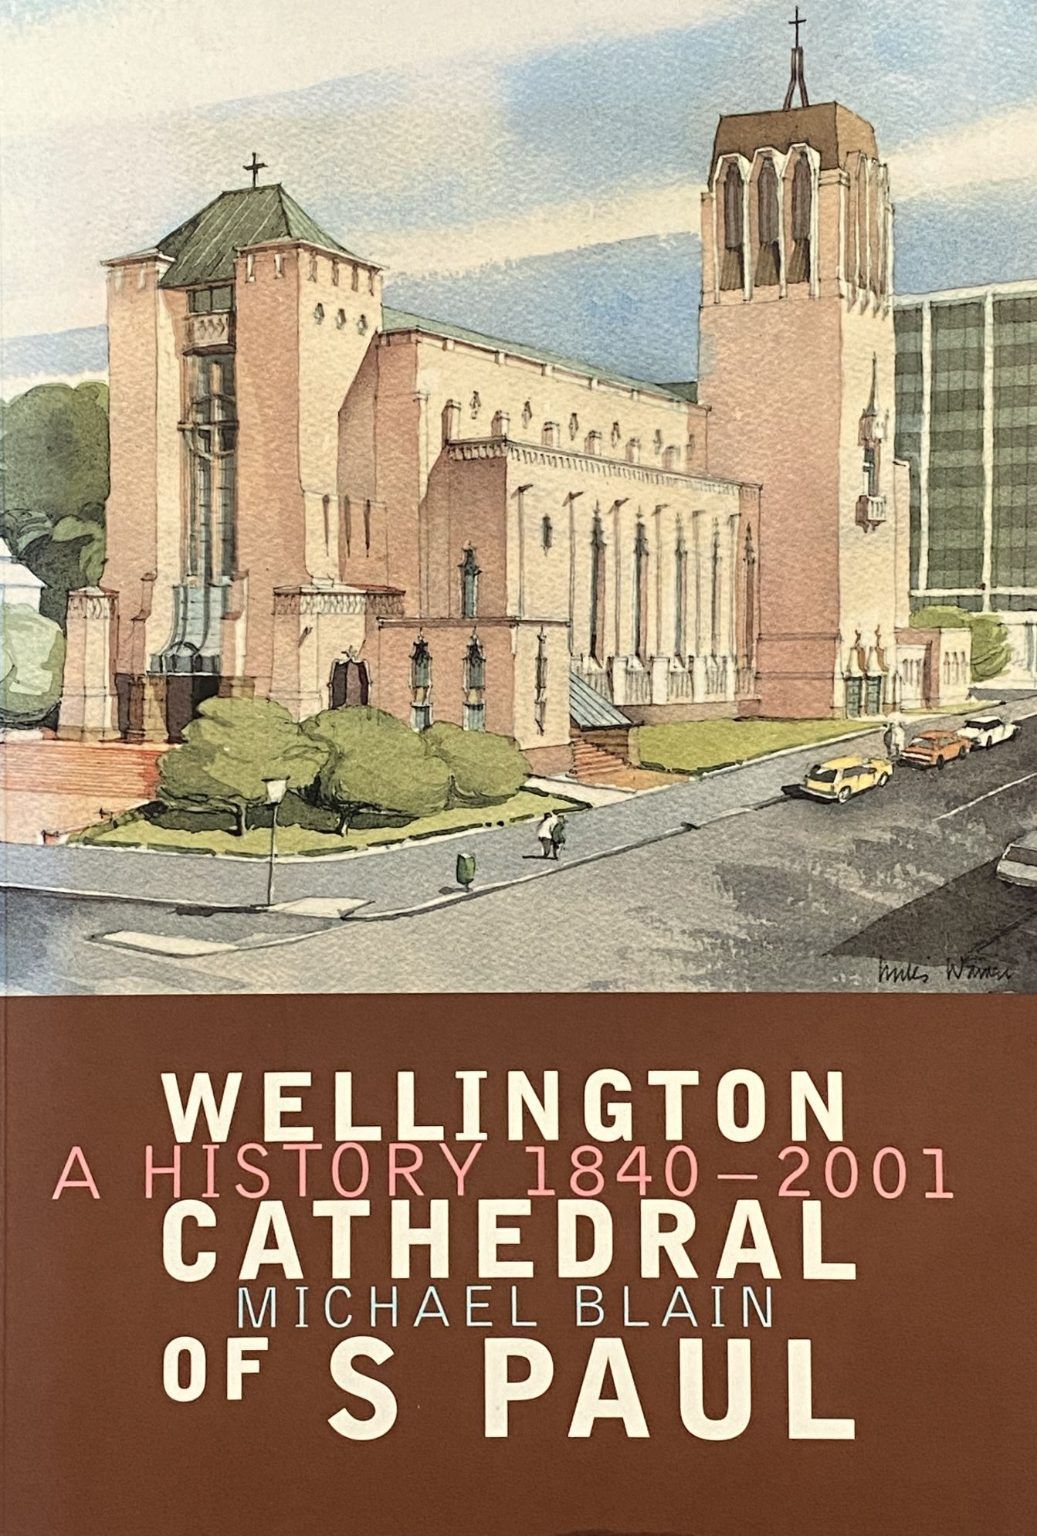 WELLINGTON CATHEDRAL OF S PAUL: A History 1840-2001